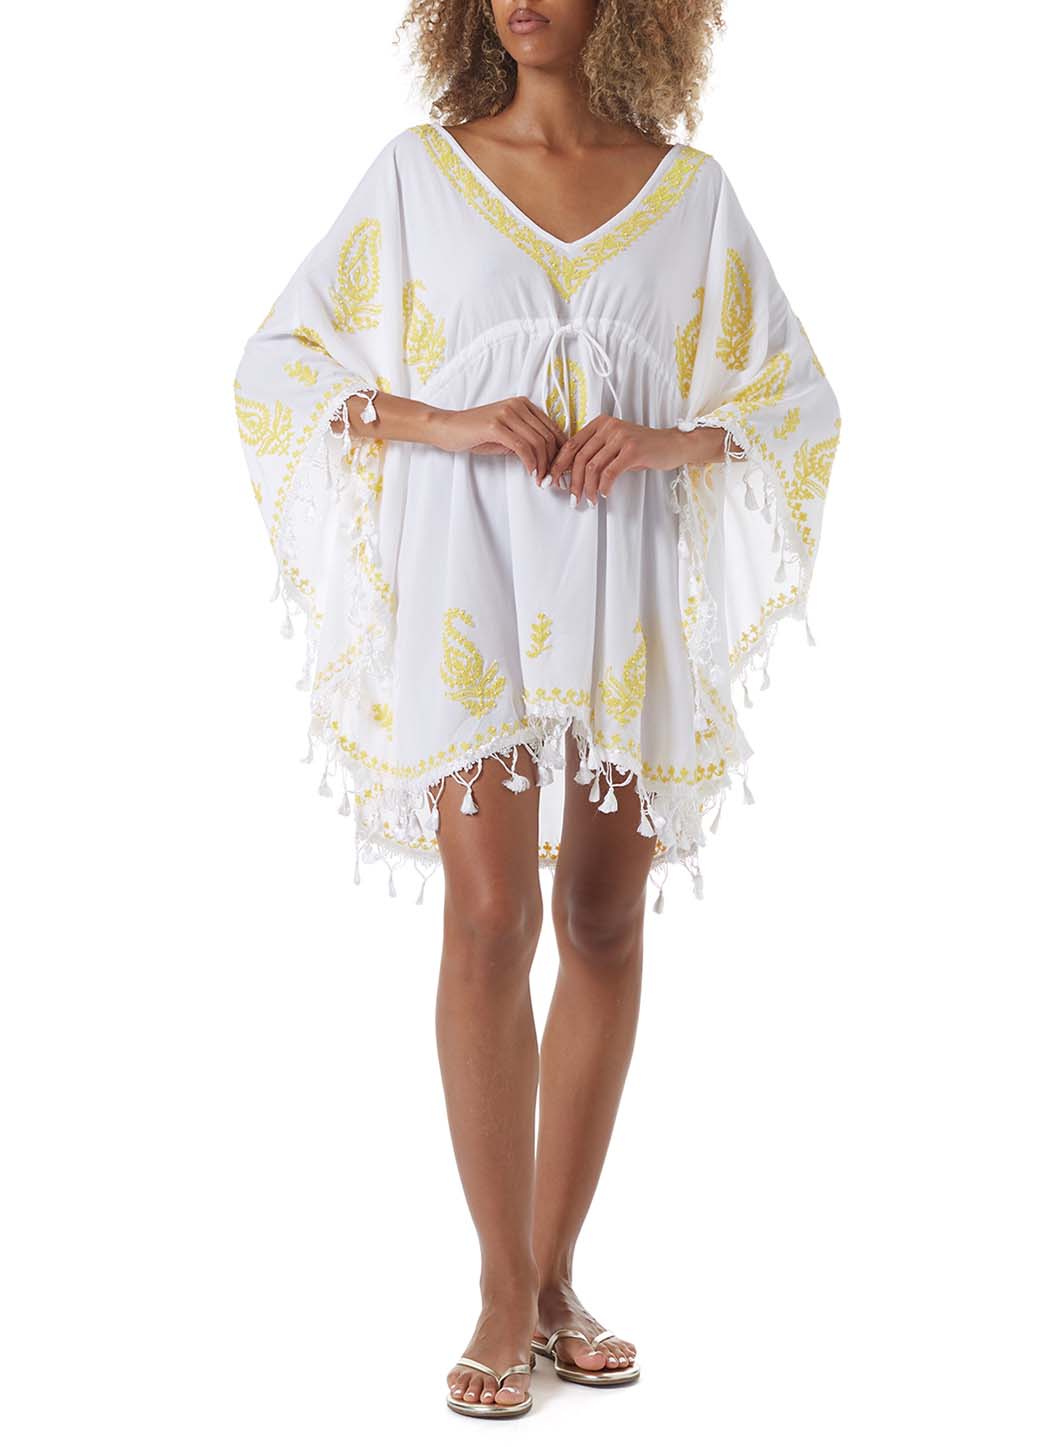 sharize-white-yellow-embroidered-kaftan-model_F